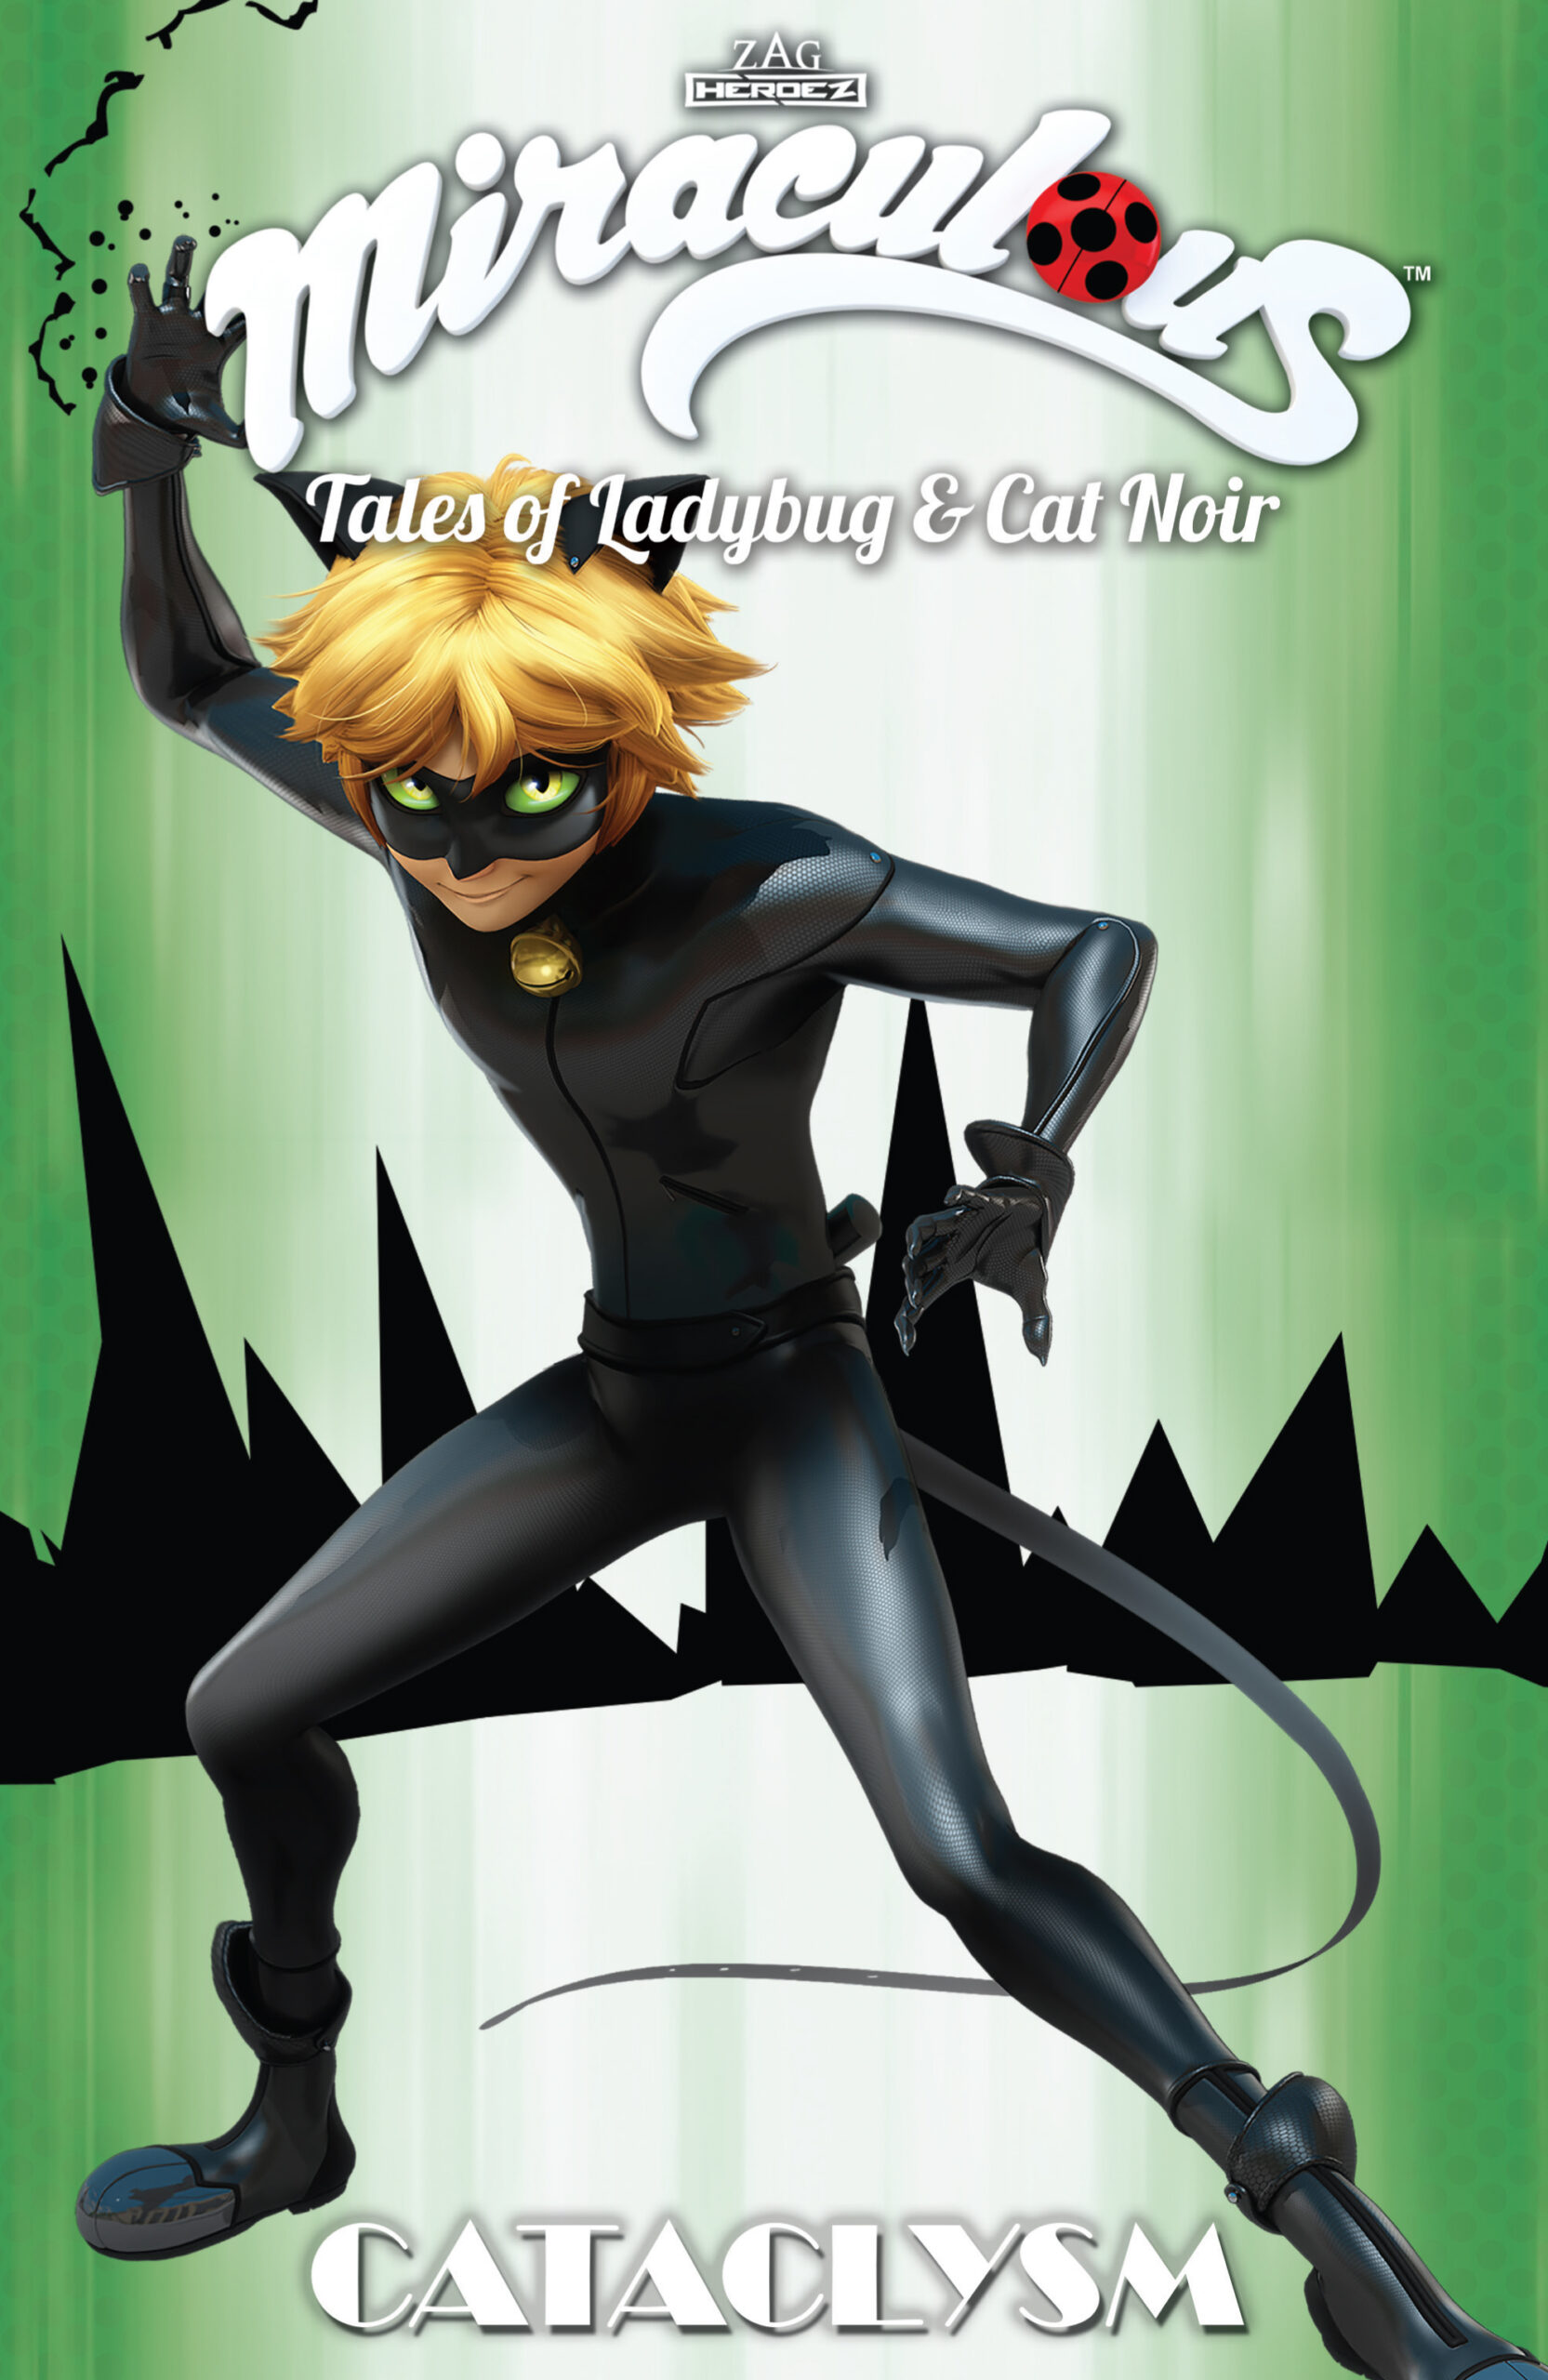 MIRACULOUS TALES OF LADYBUG AND CAT NOIR VOLUME 6